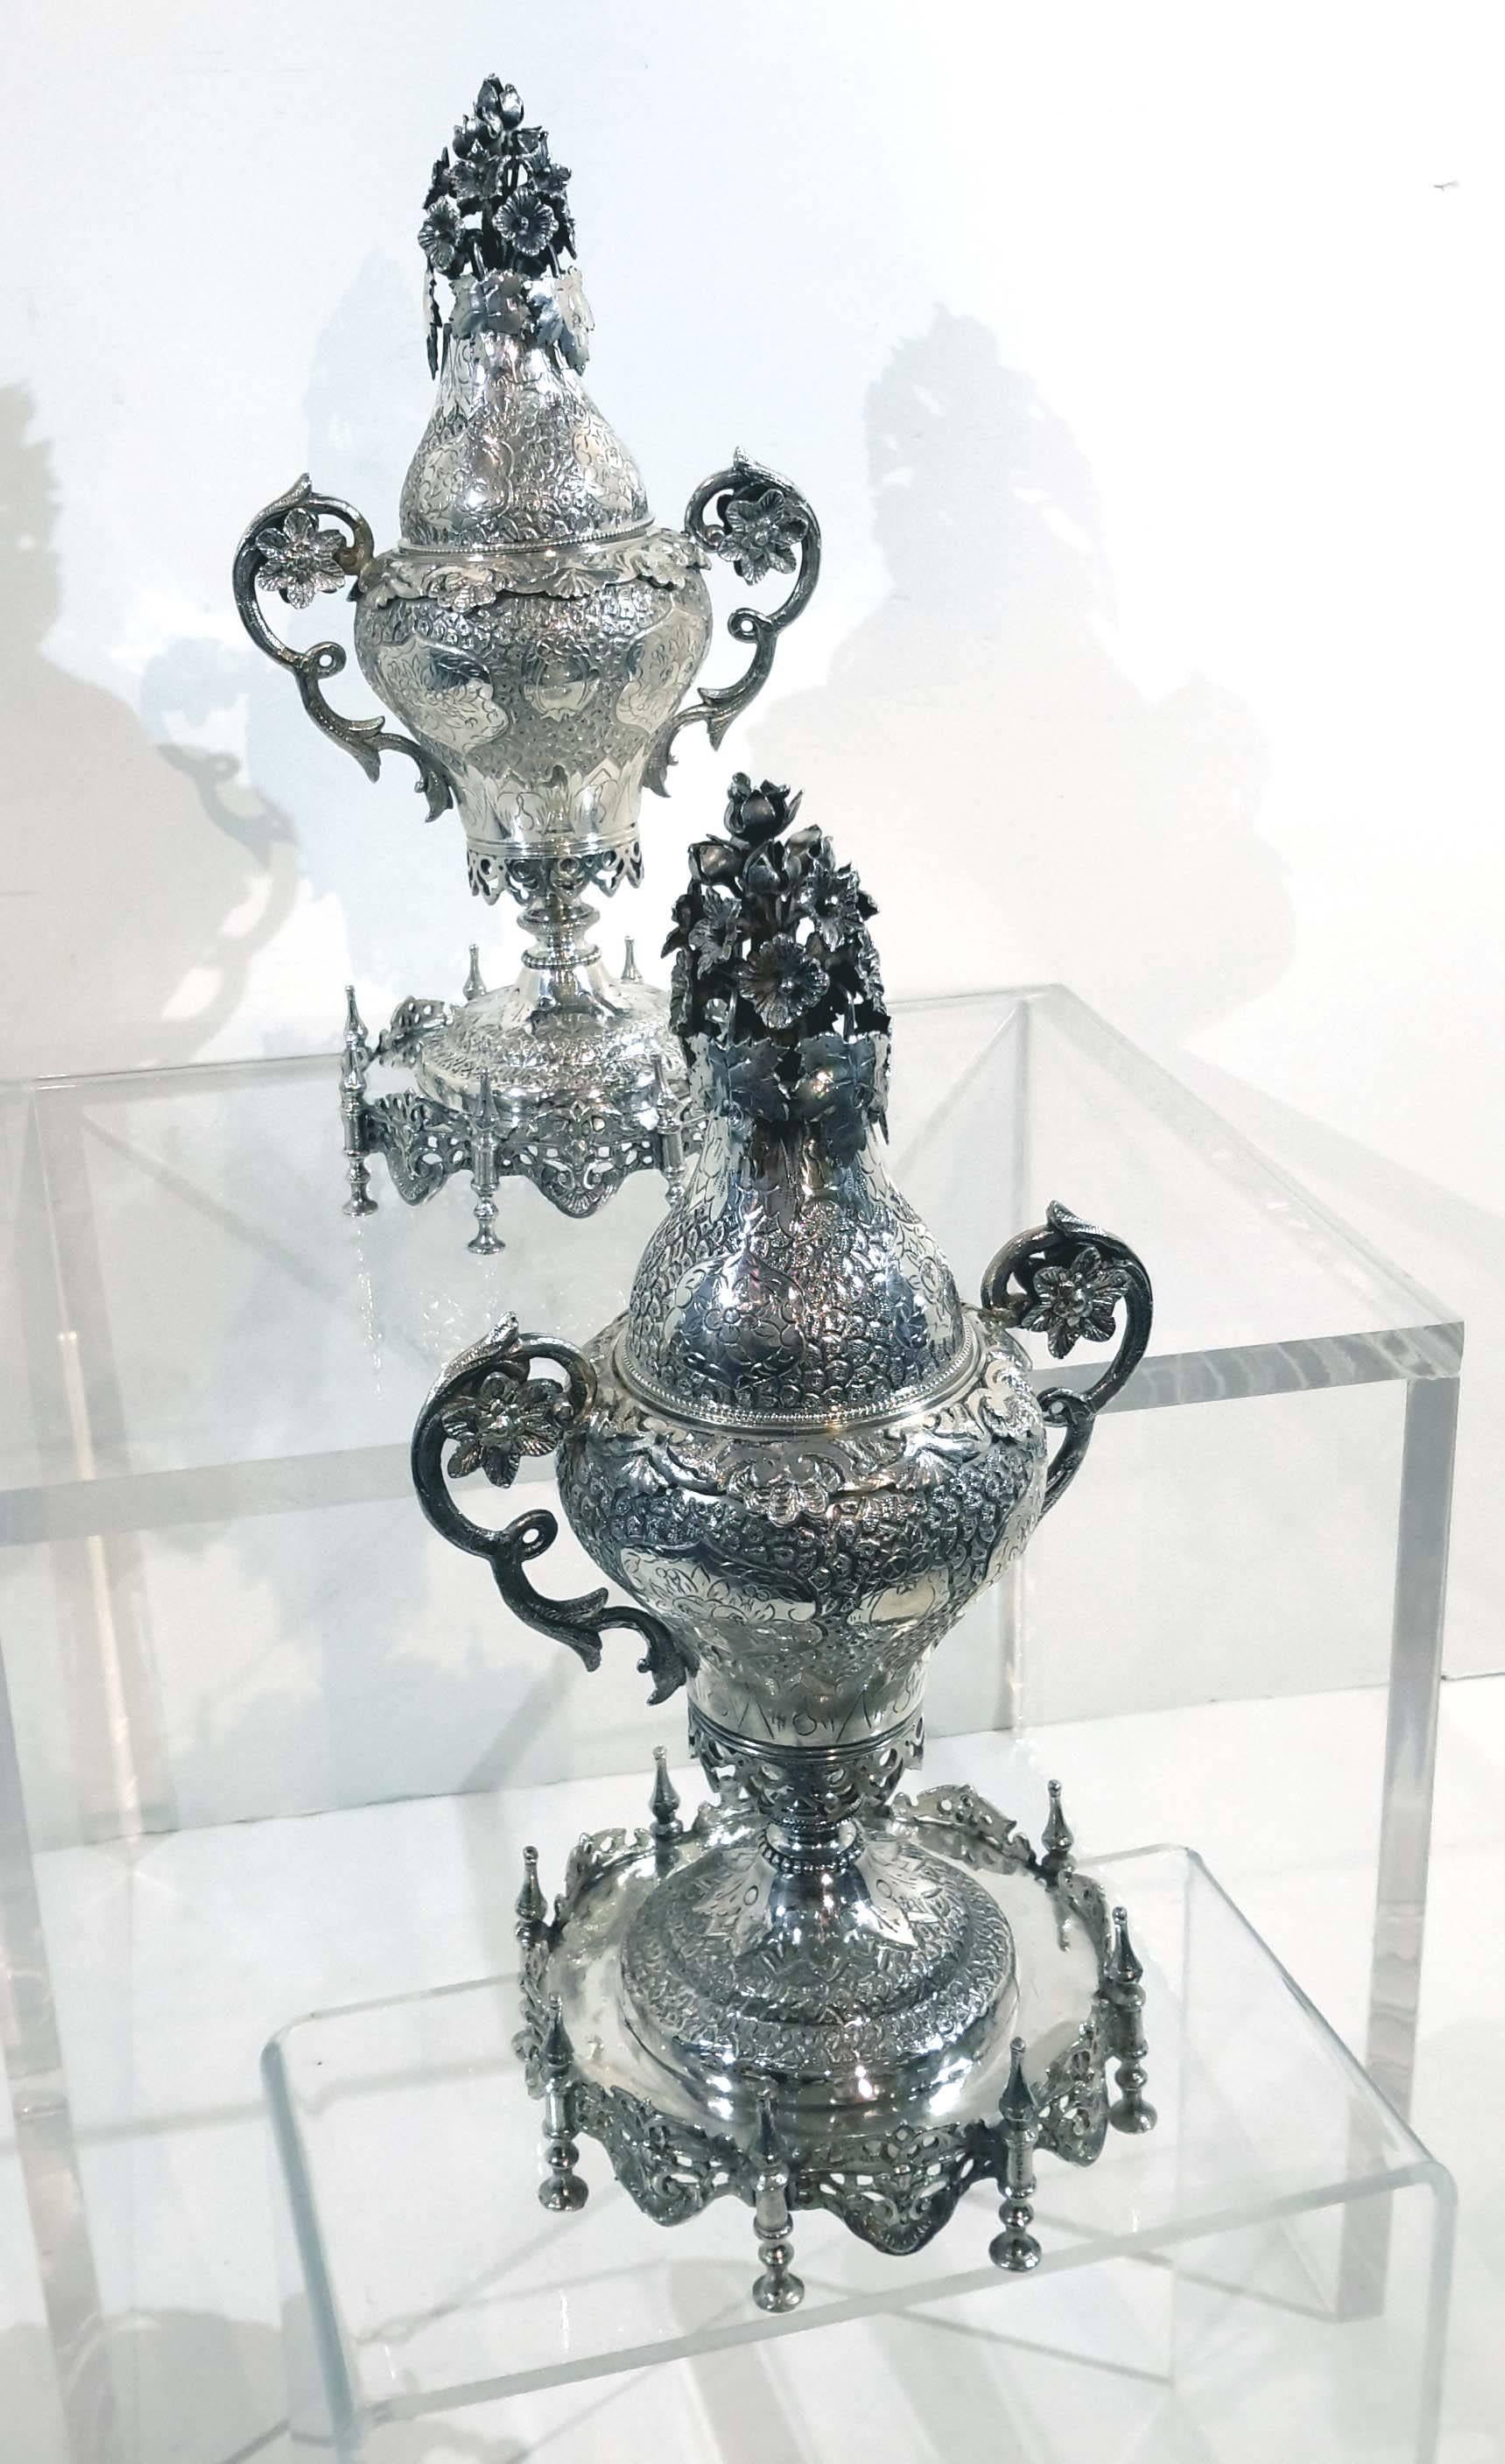 Pair of Ottoman Silver Spice & Rosewater Containers, Turkey, 19th Century 3